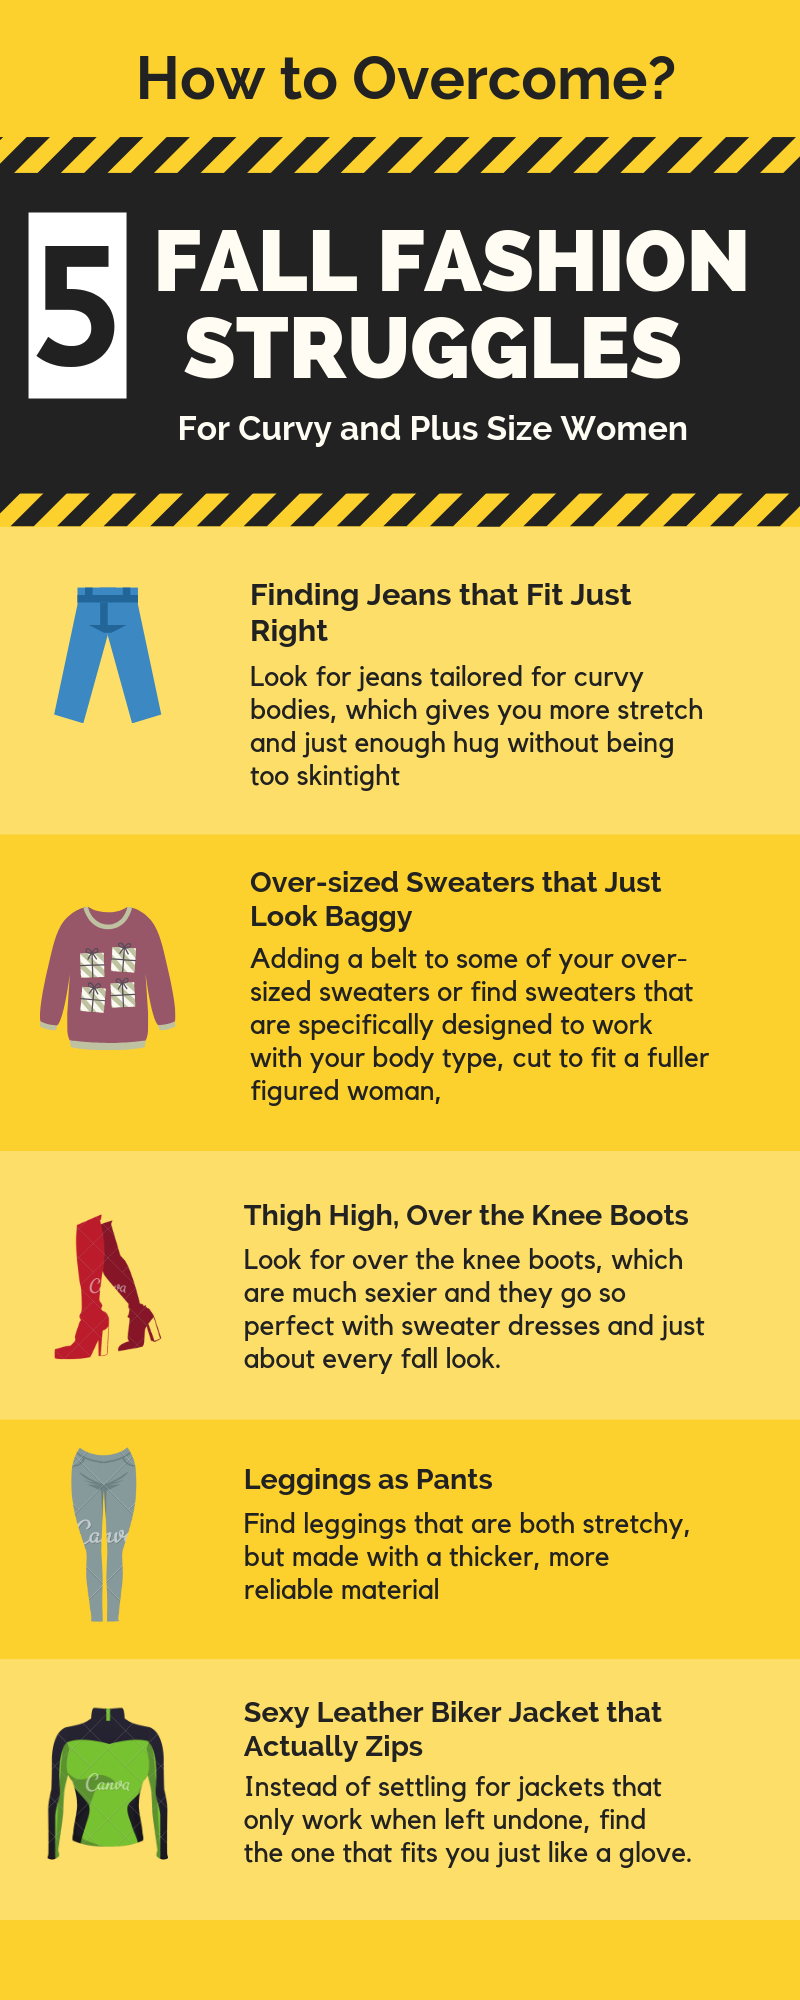 5 Fall Fashion Struggles for Curvy and Plus Size Women - Red Tulip Boutique